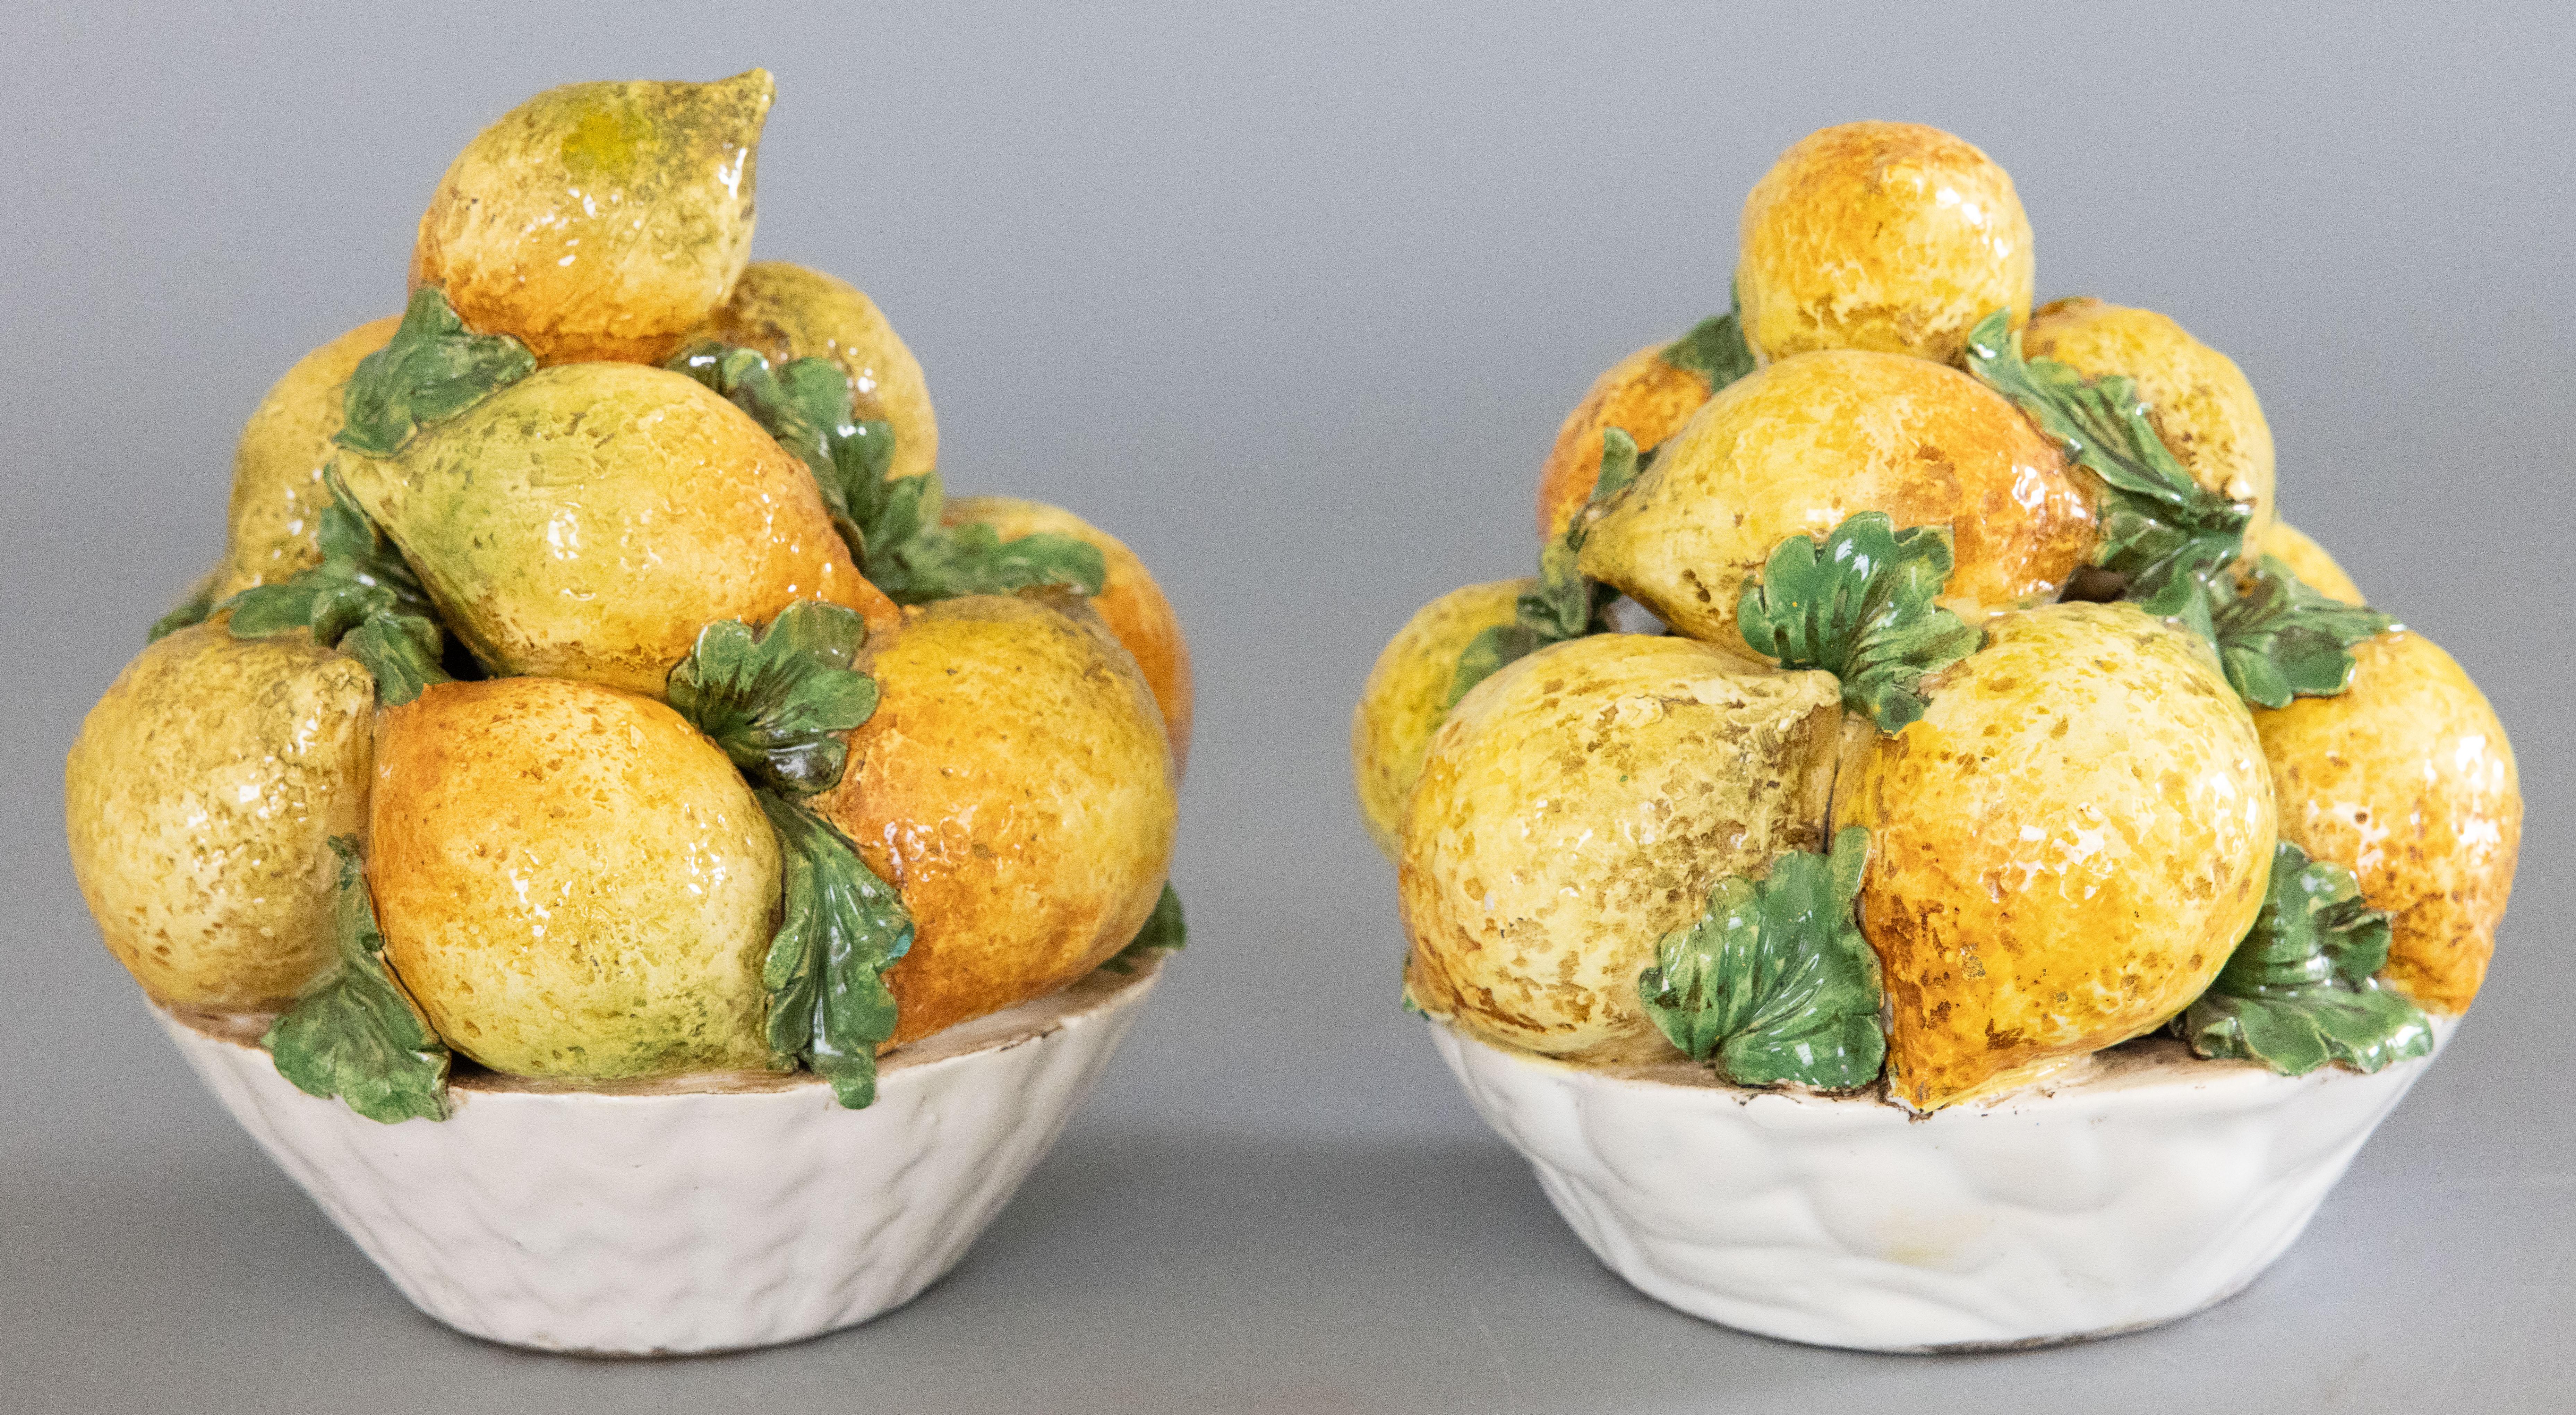 A lovely pair of vintage Italian majolica bowls of lemons centerpieces, circa 1950. Freshen up your kitchen or breakfast room with these gorgeous hand painted arrangements of lemons accented by vibrant green leaves in white latticework